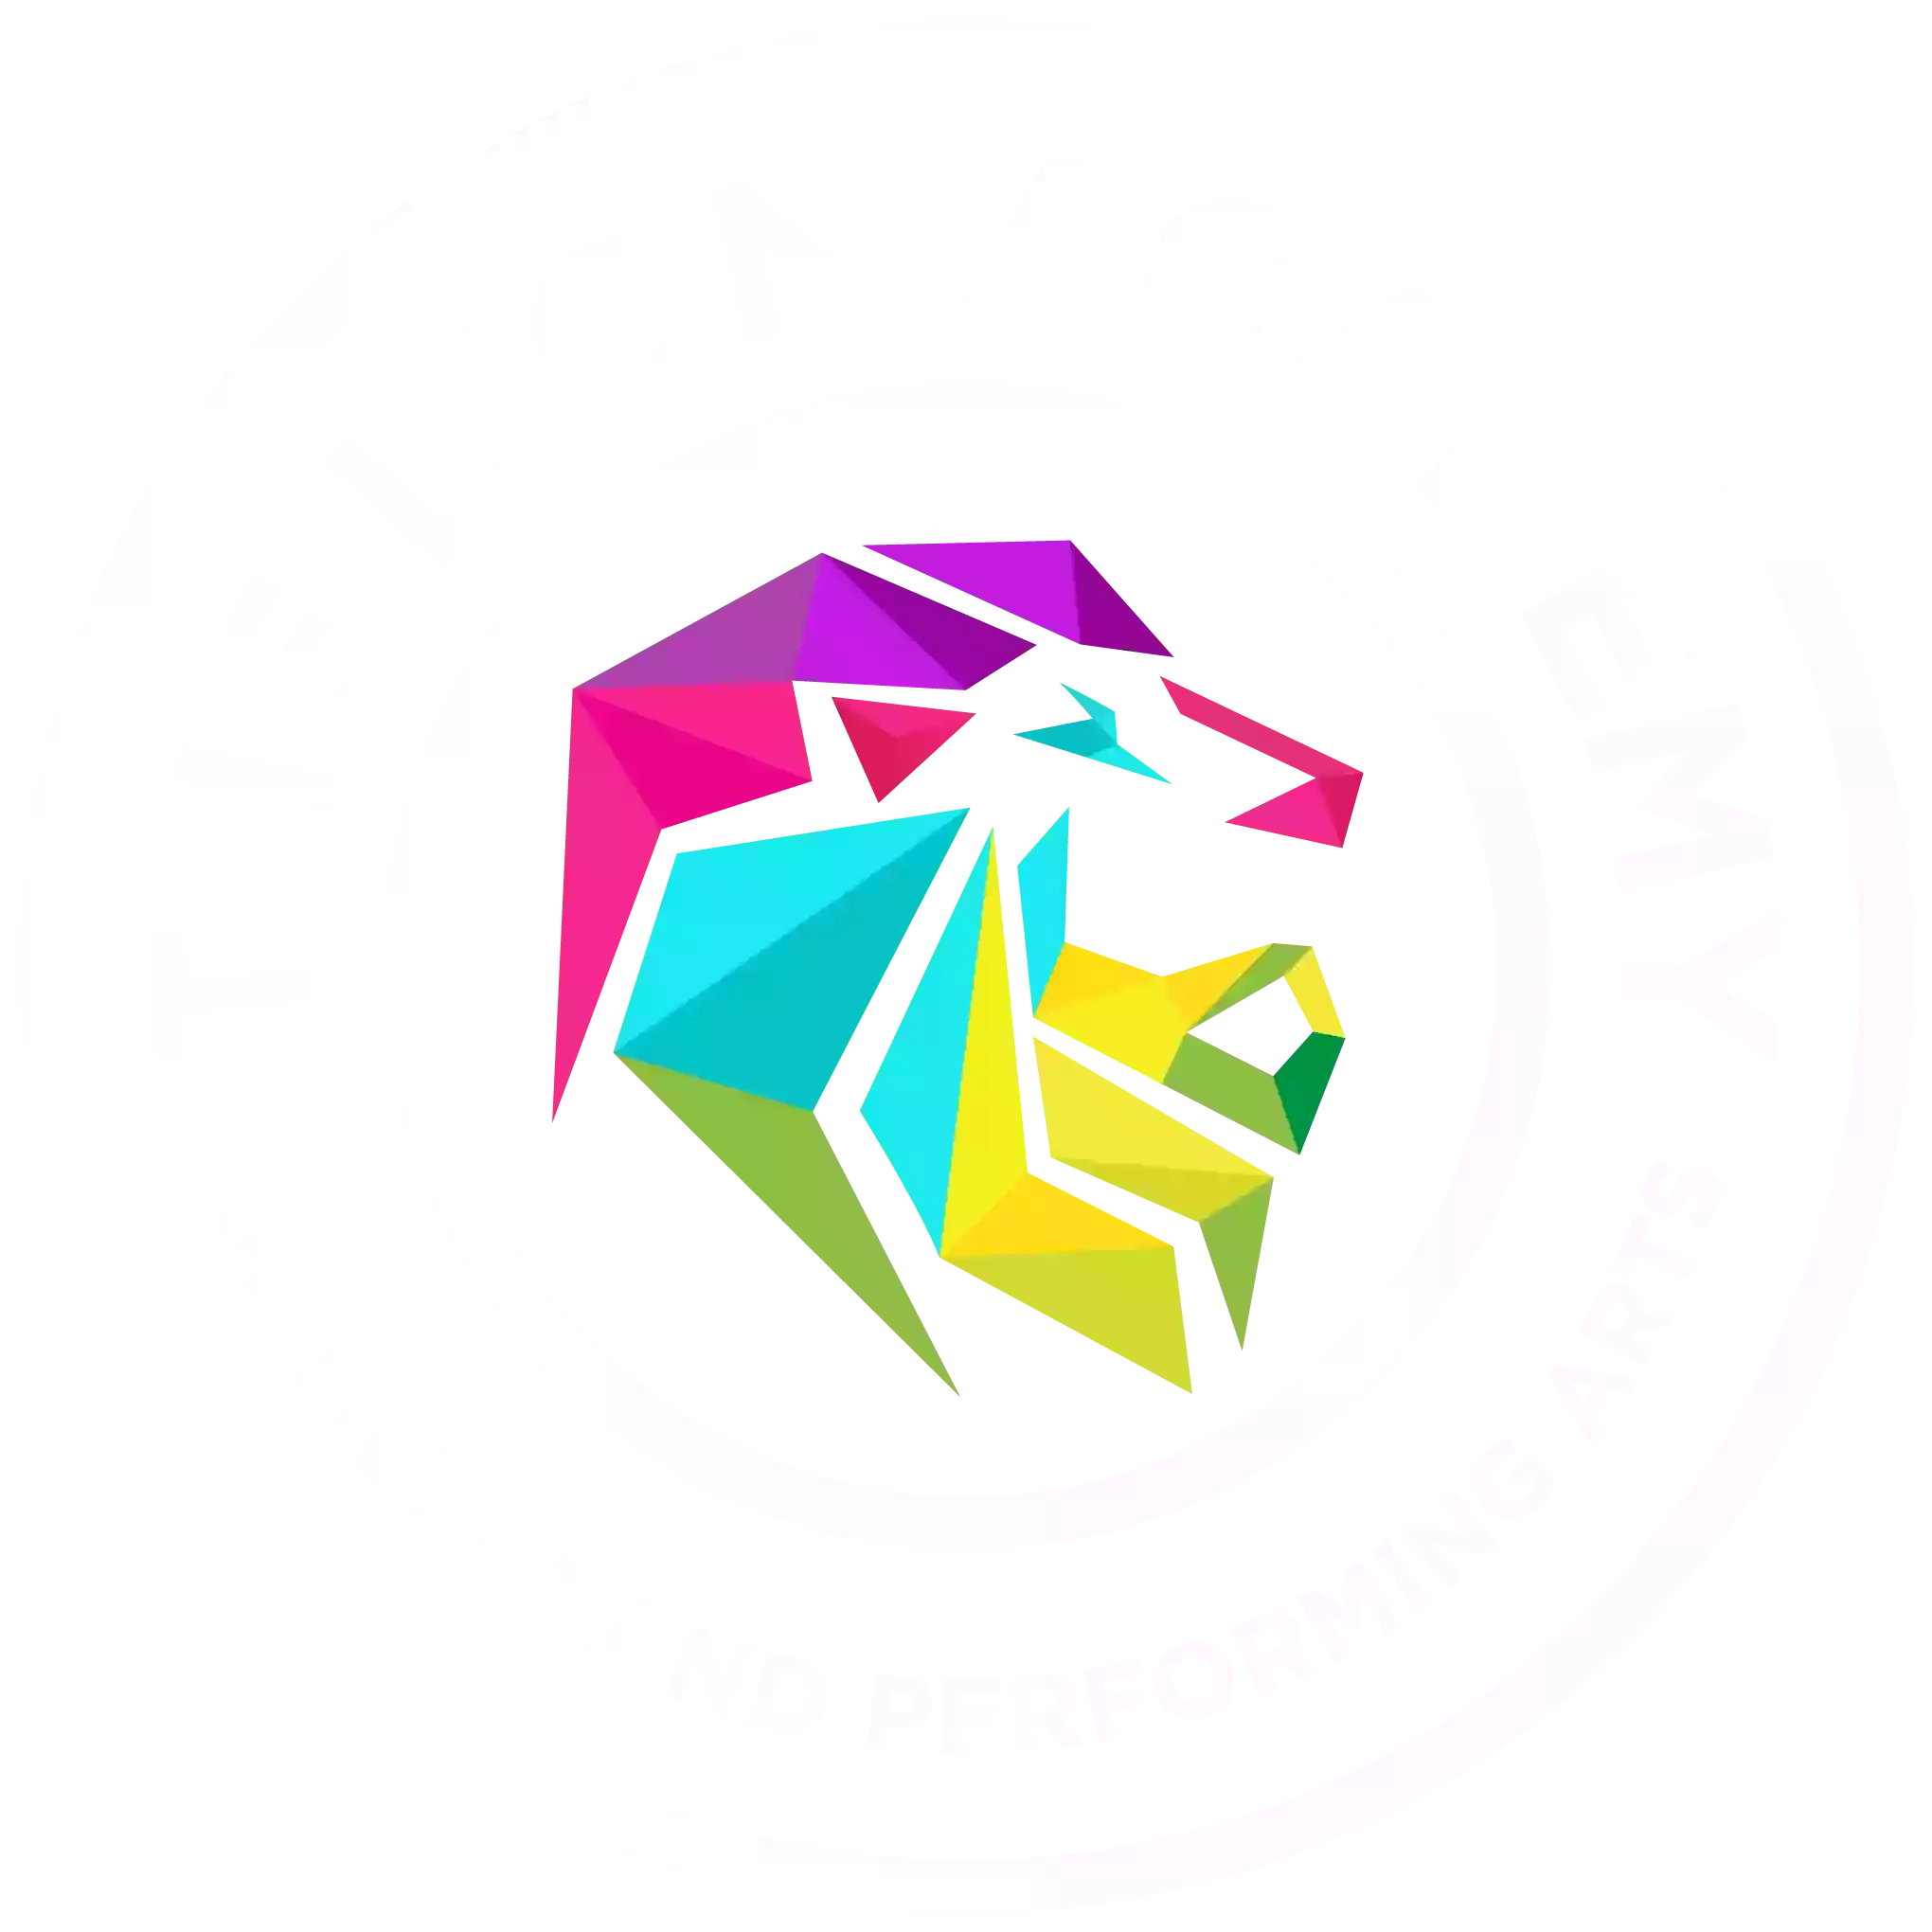 The Lion Academy of Music & Performing Arts